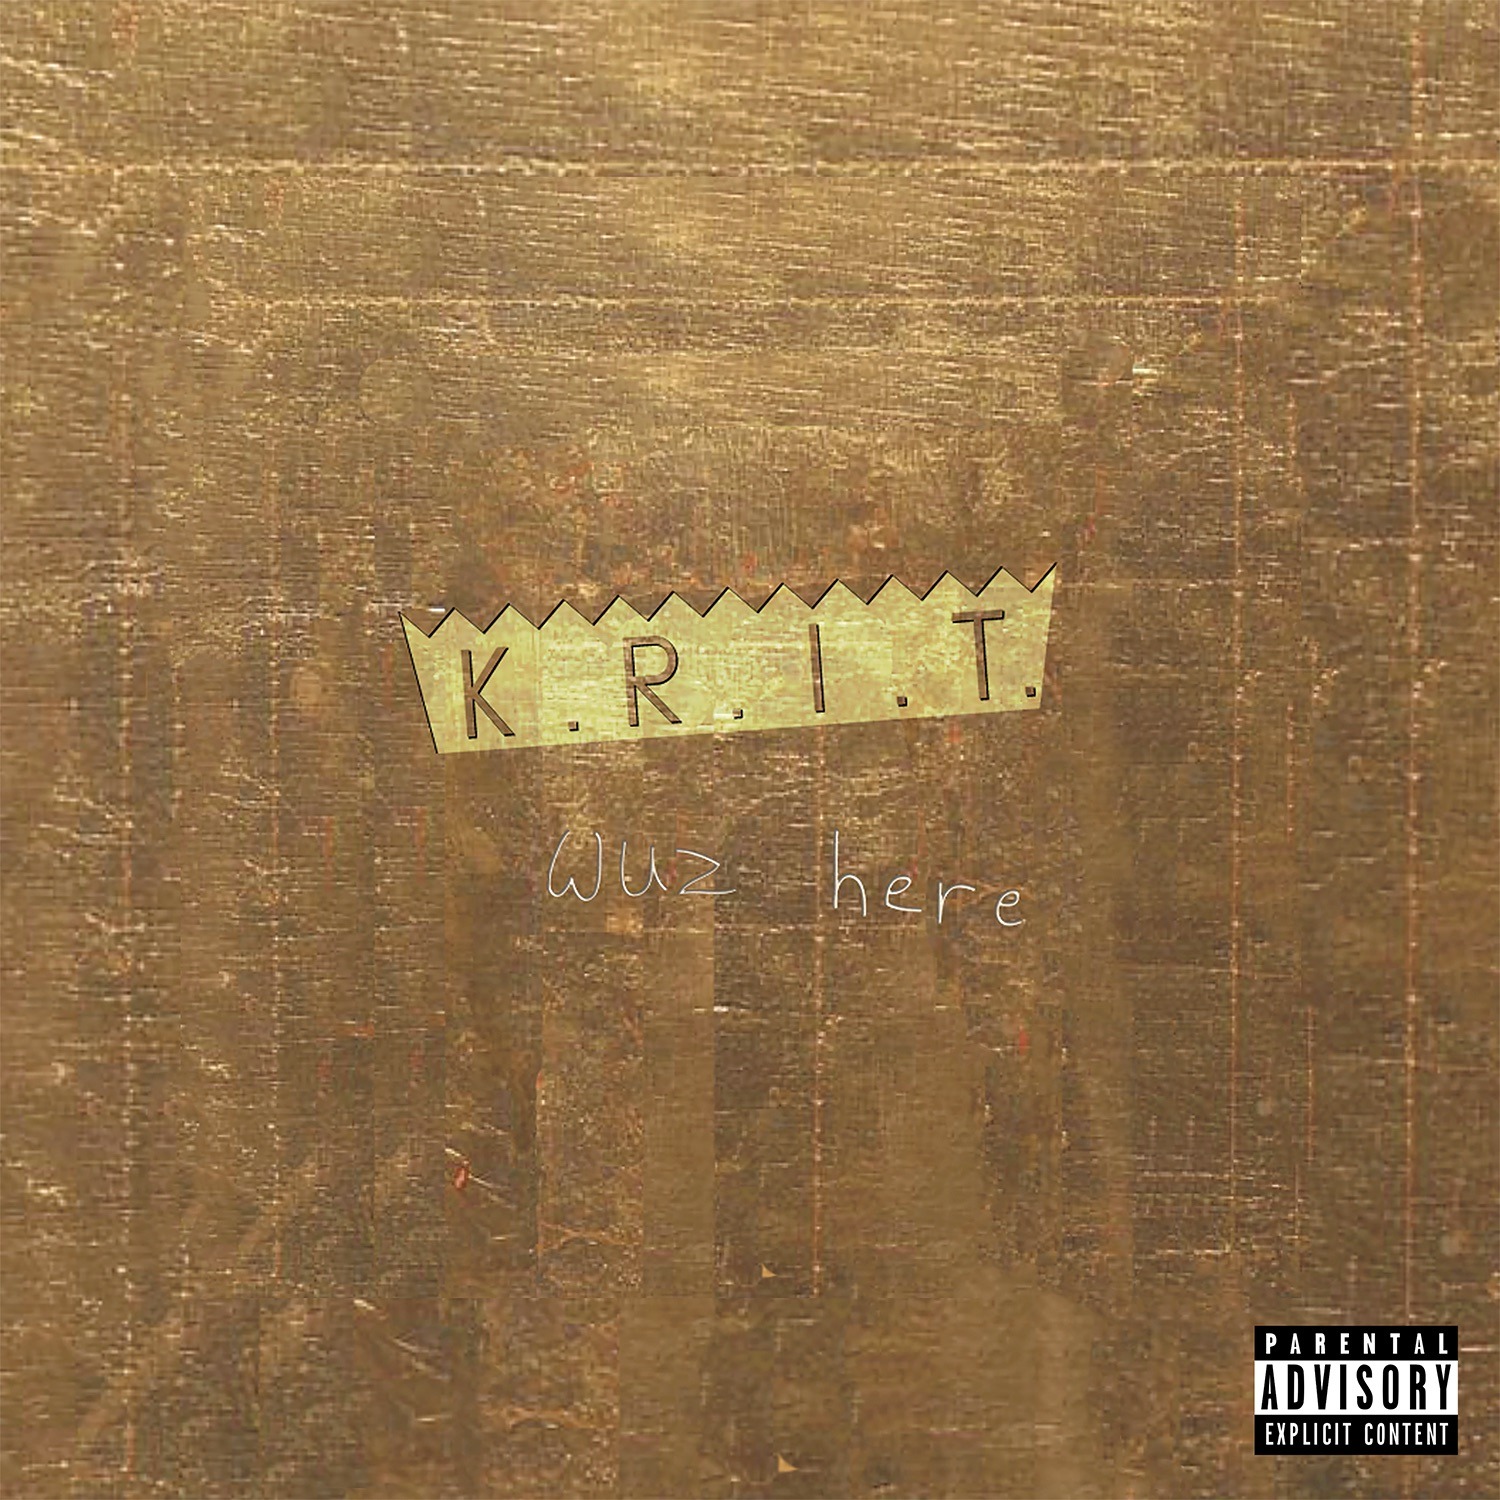 Big K.R.I.T. Drops Remastered 'K.R.I.T. Wuz Here' Mixtape Stream With New Songs